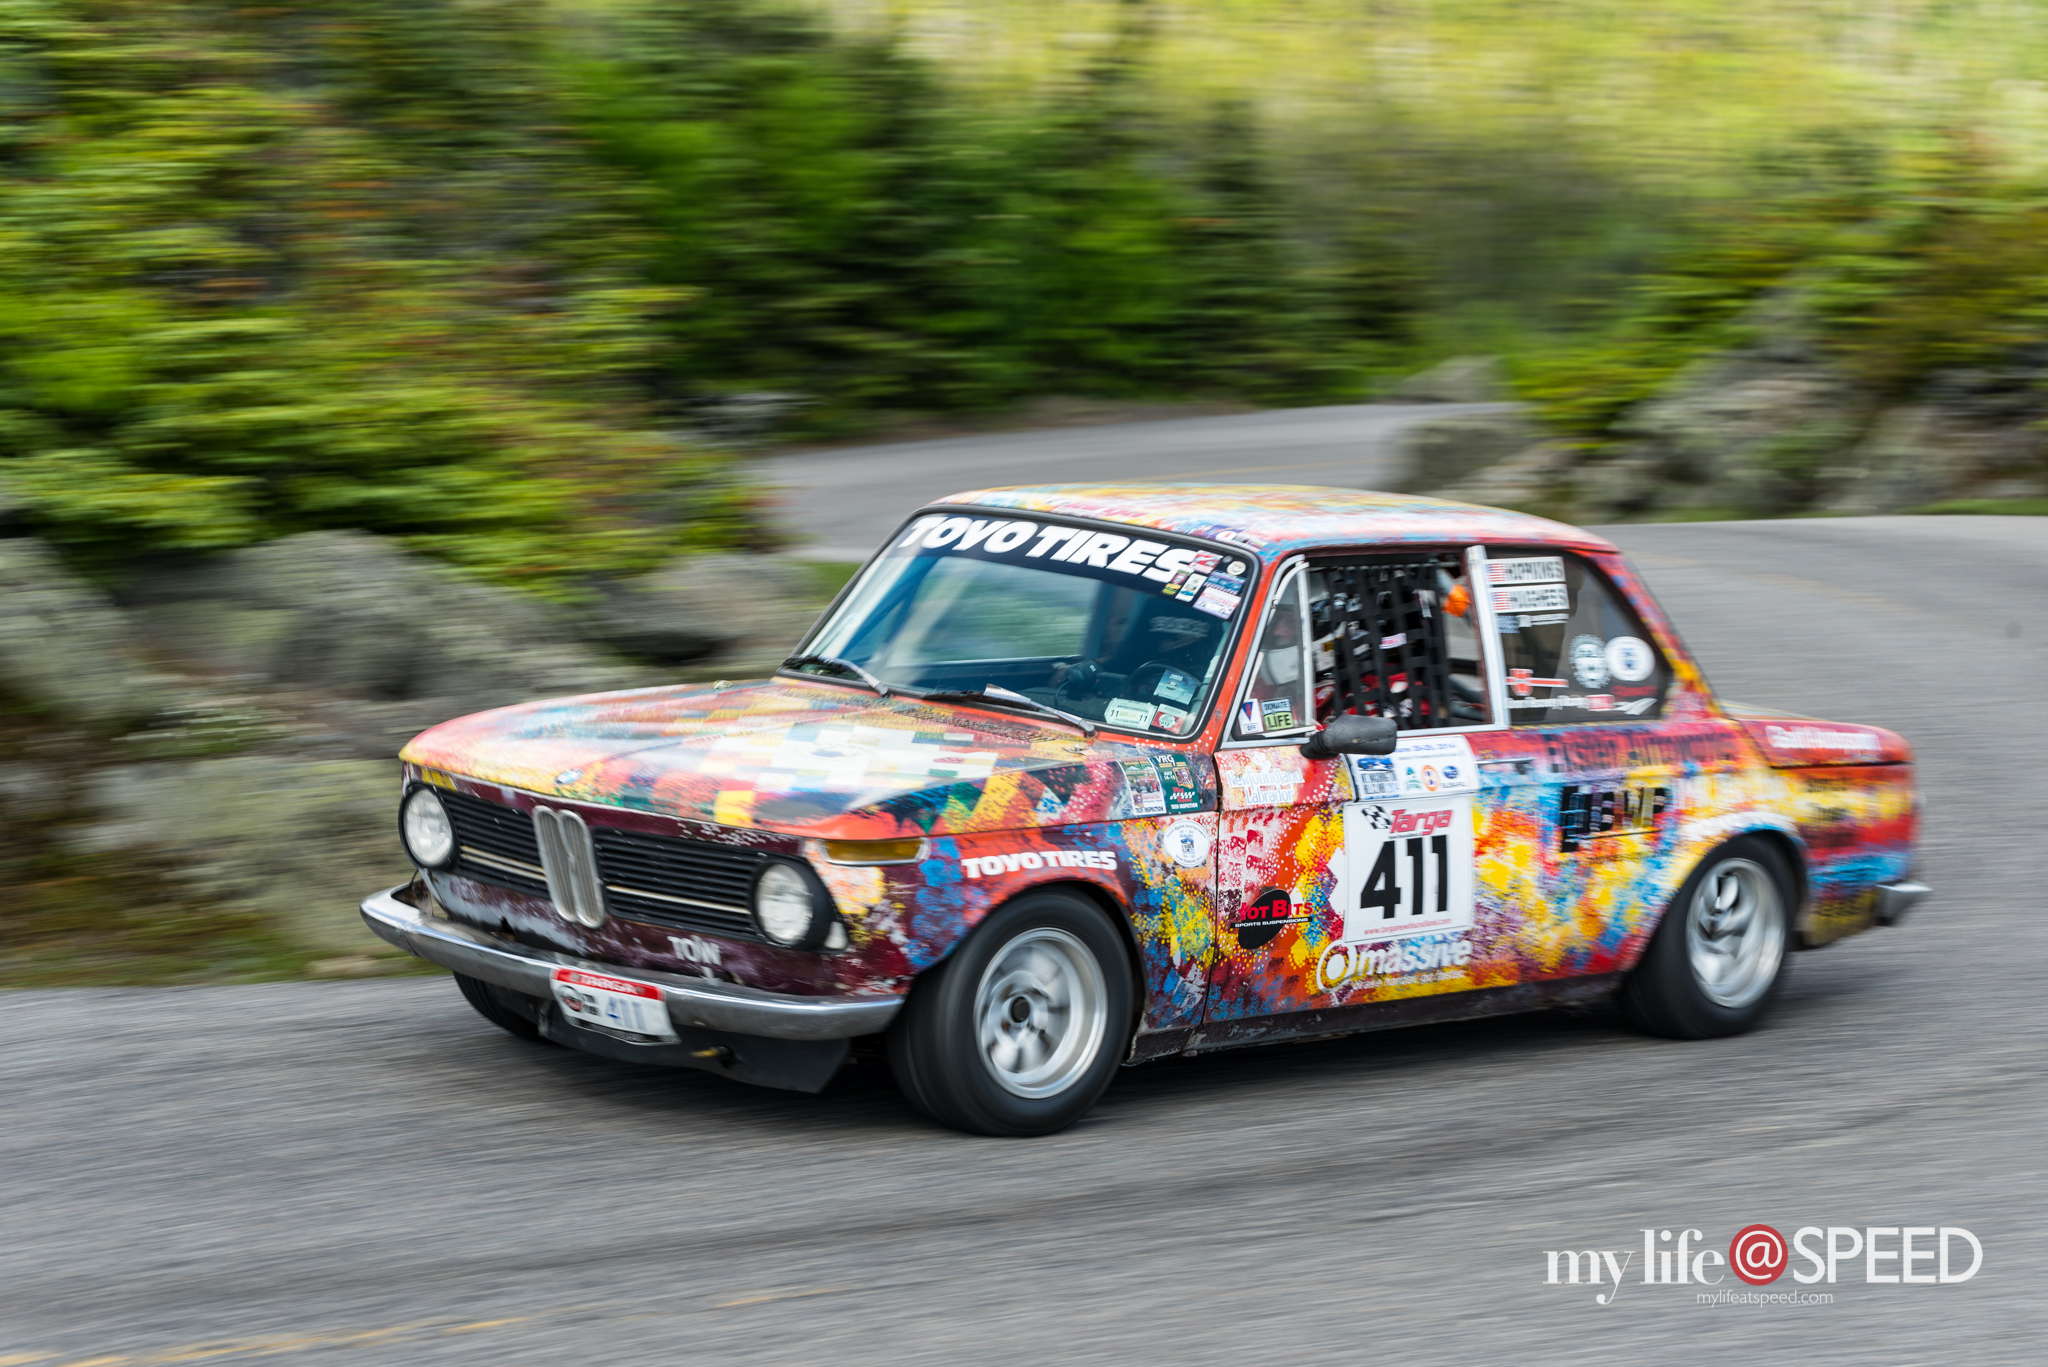 411 69" BMW 2002 rounding the corners at Signal Corps